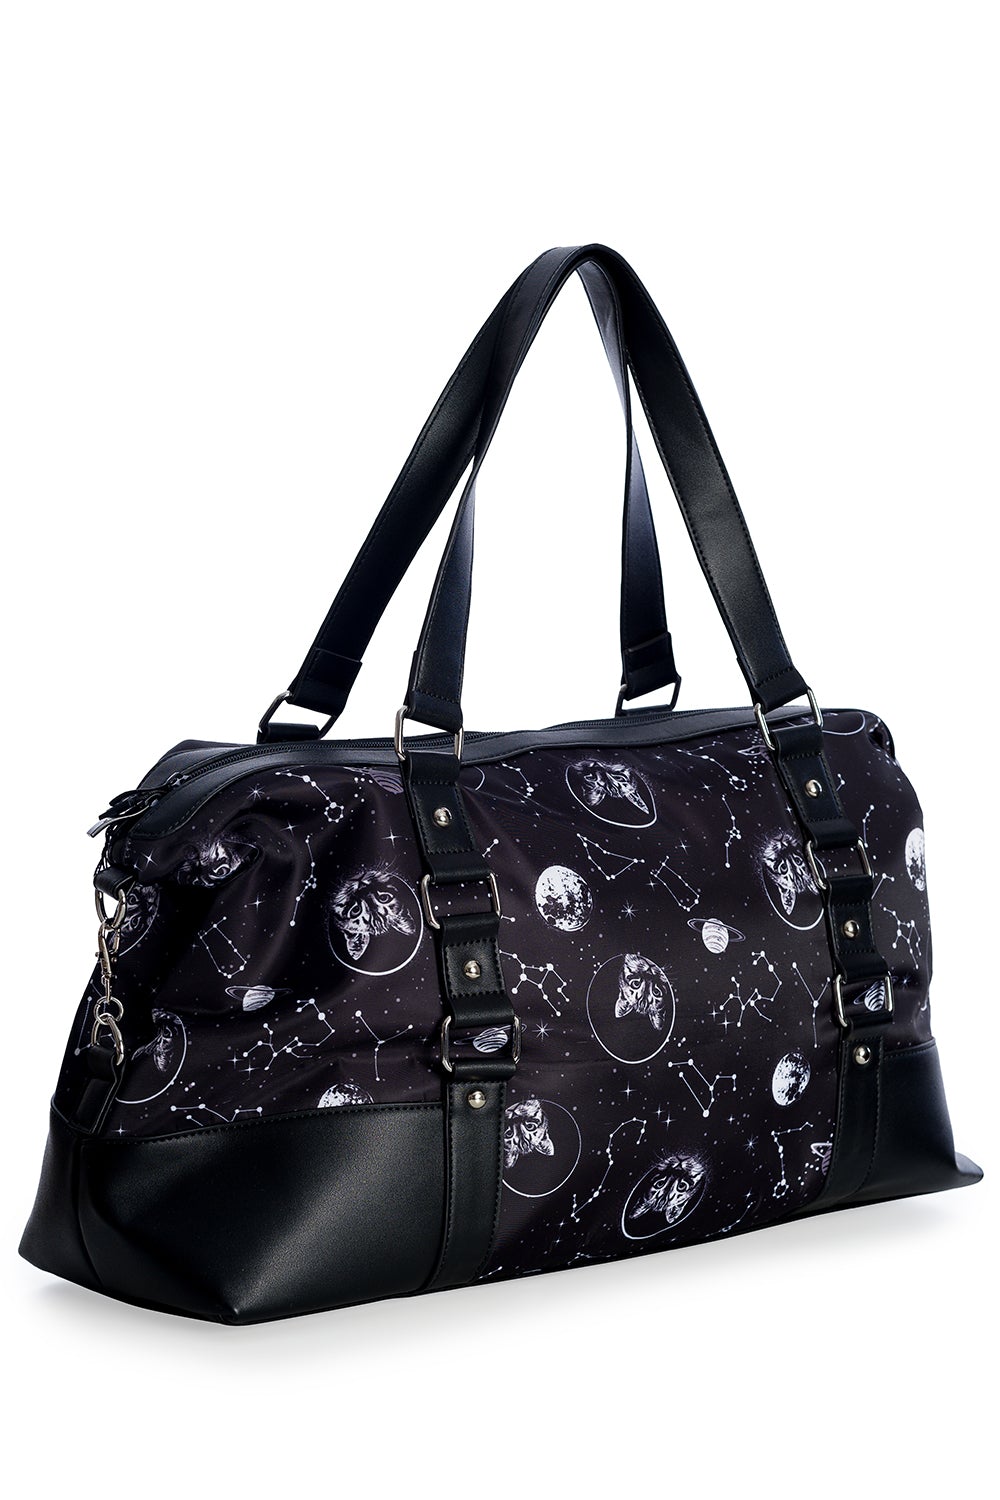 Banned Alternative Space Kitty Large Gym Bag